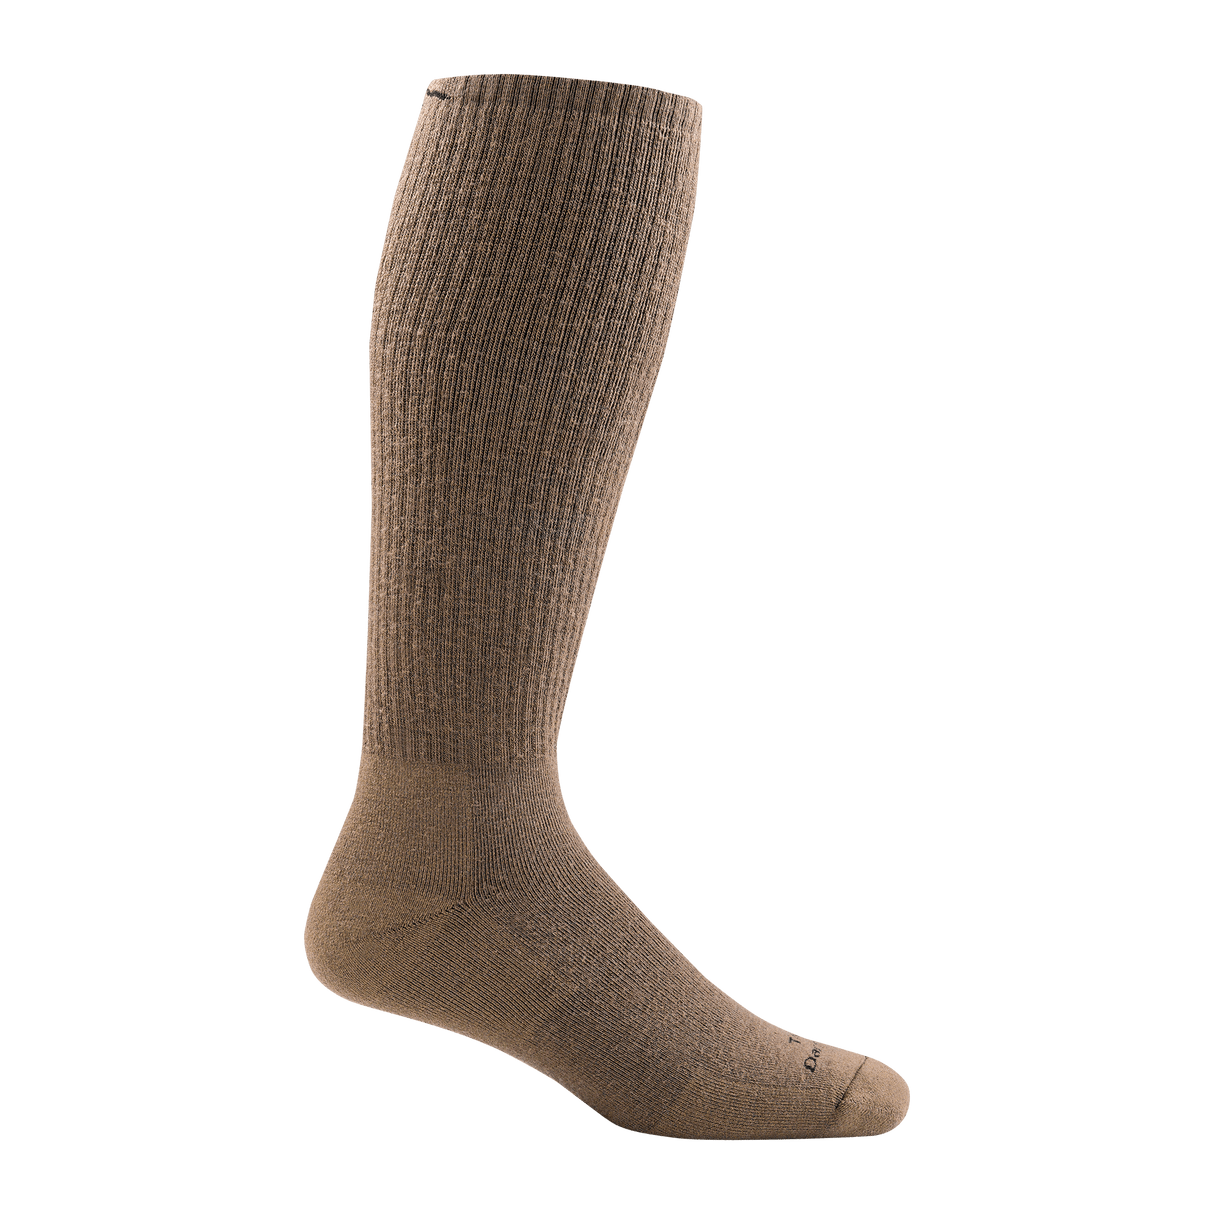 Darn Tough Over-the-Calf Heavyweight Tactical Socks with Full Cushion  -  X-Small / Coyote Brown